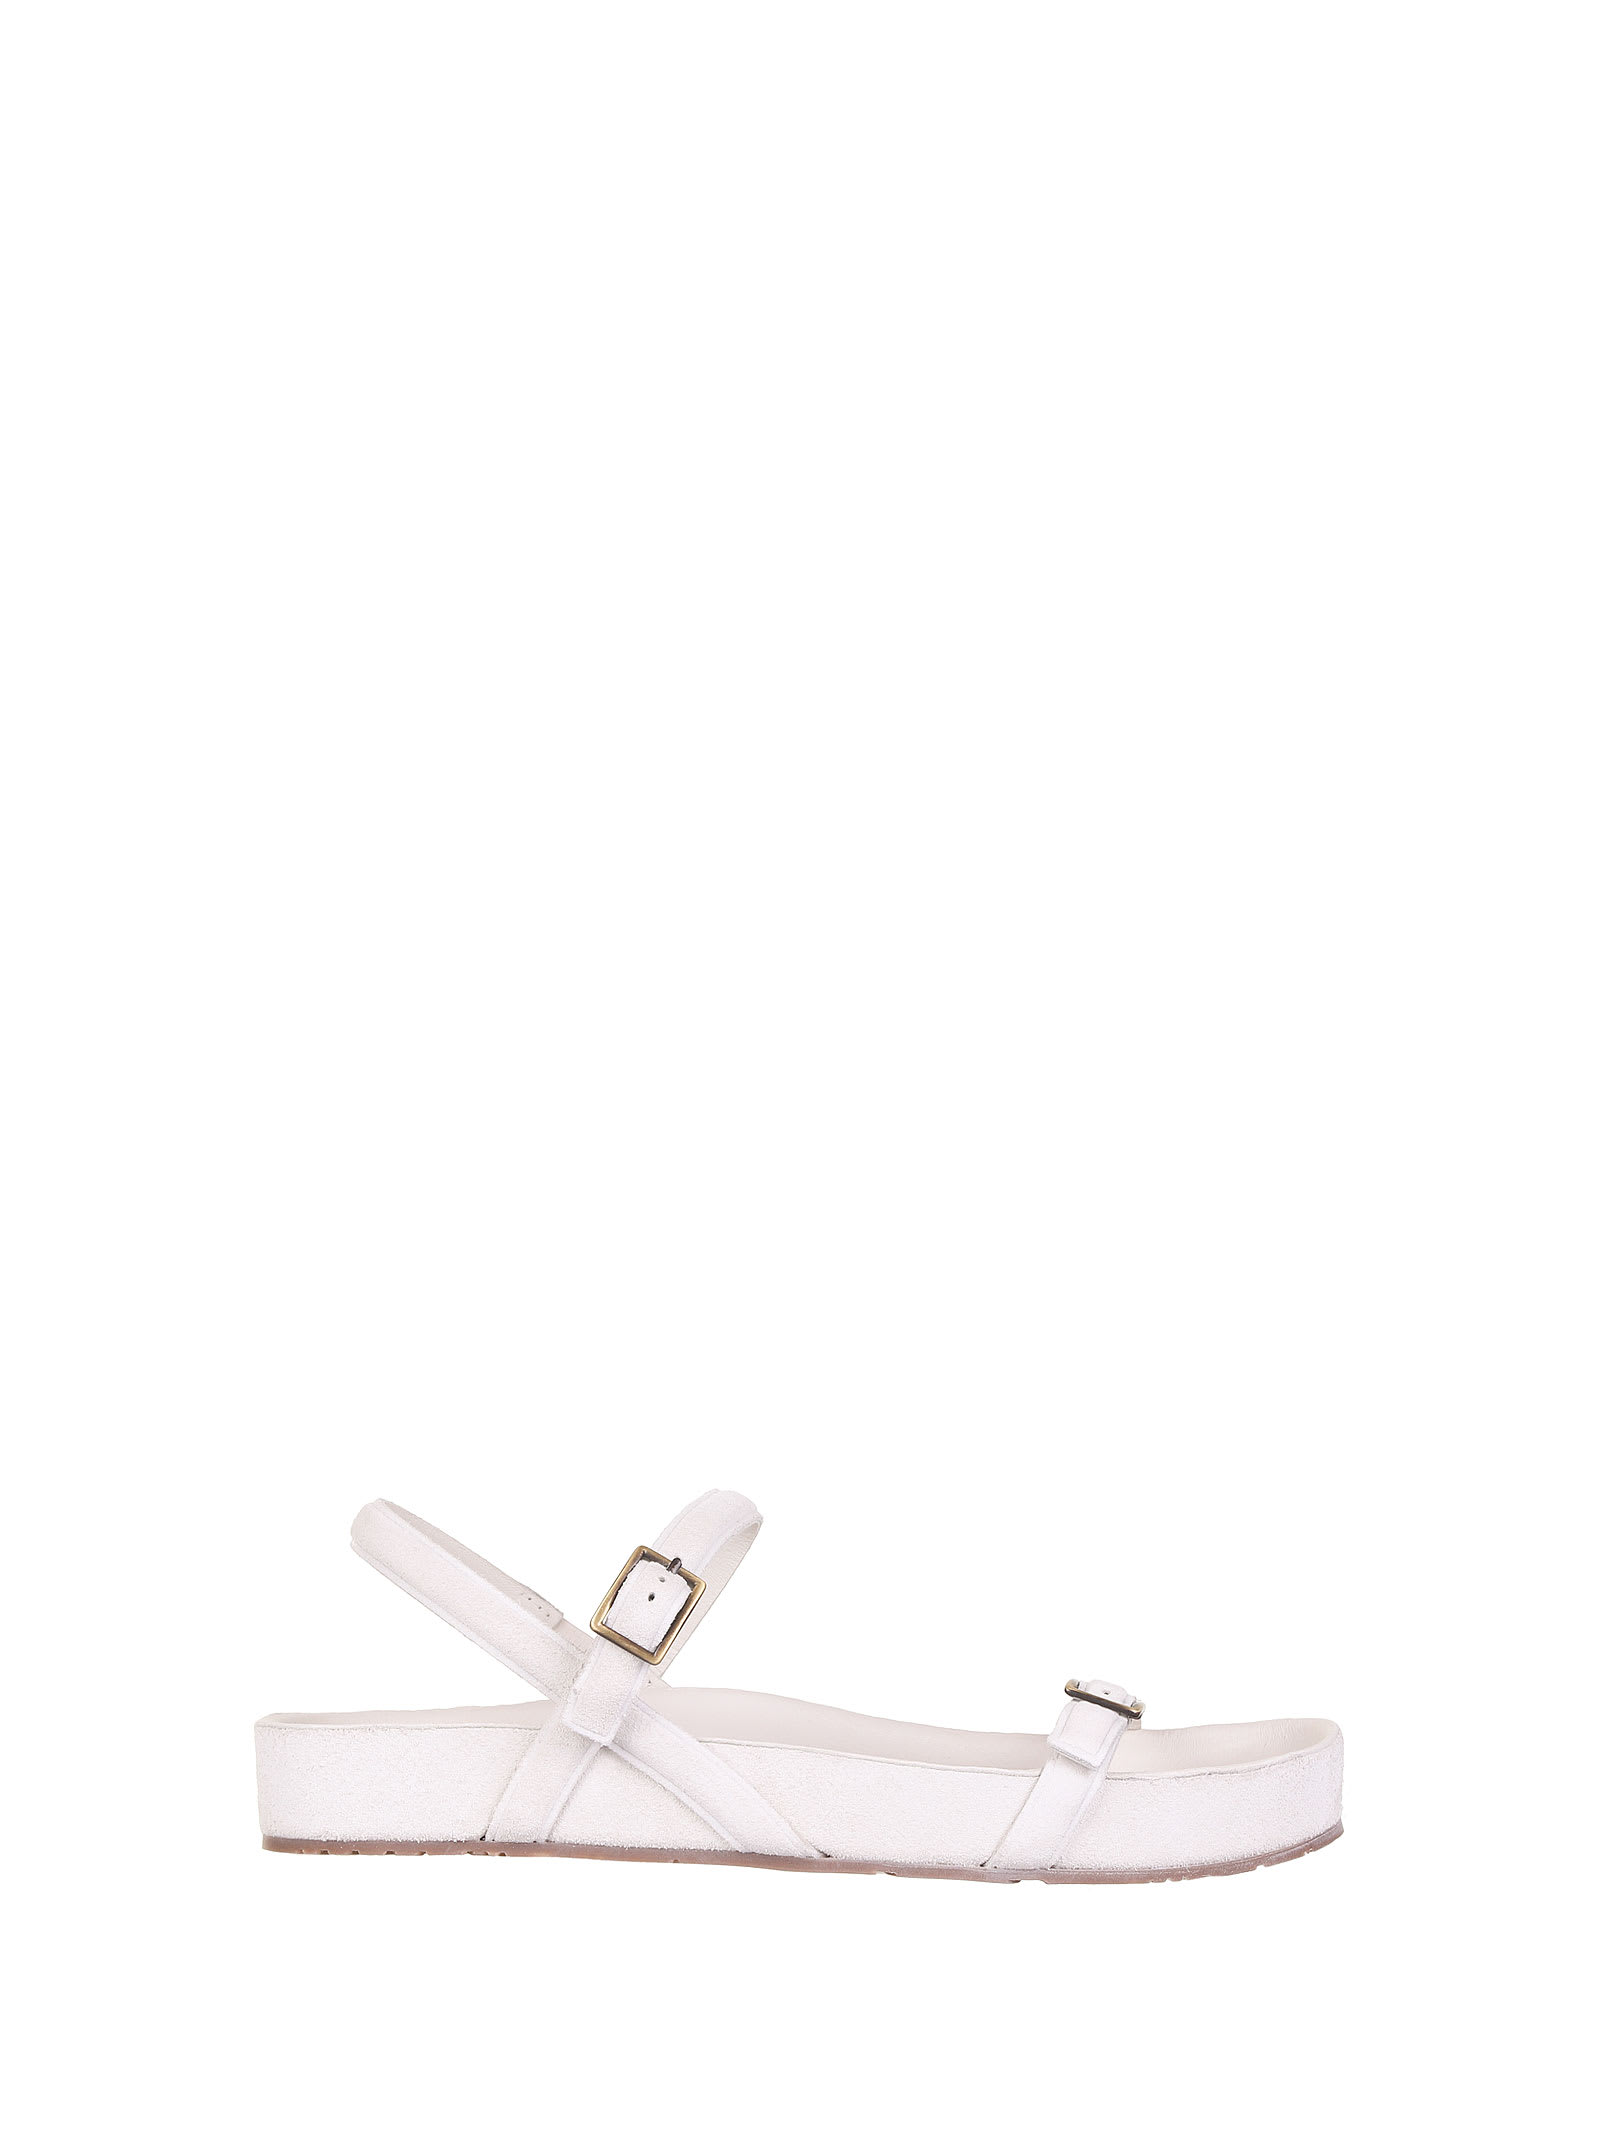 Pedro Garcia Sandal With Buckles In White Suede